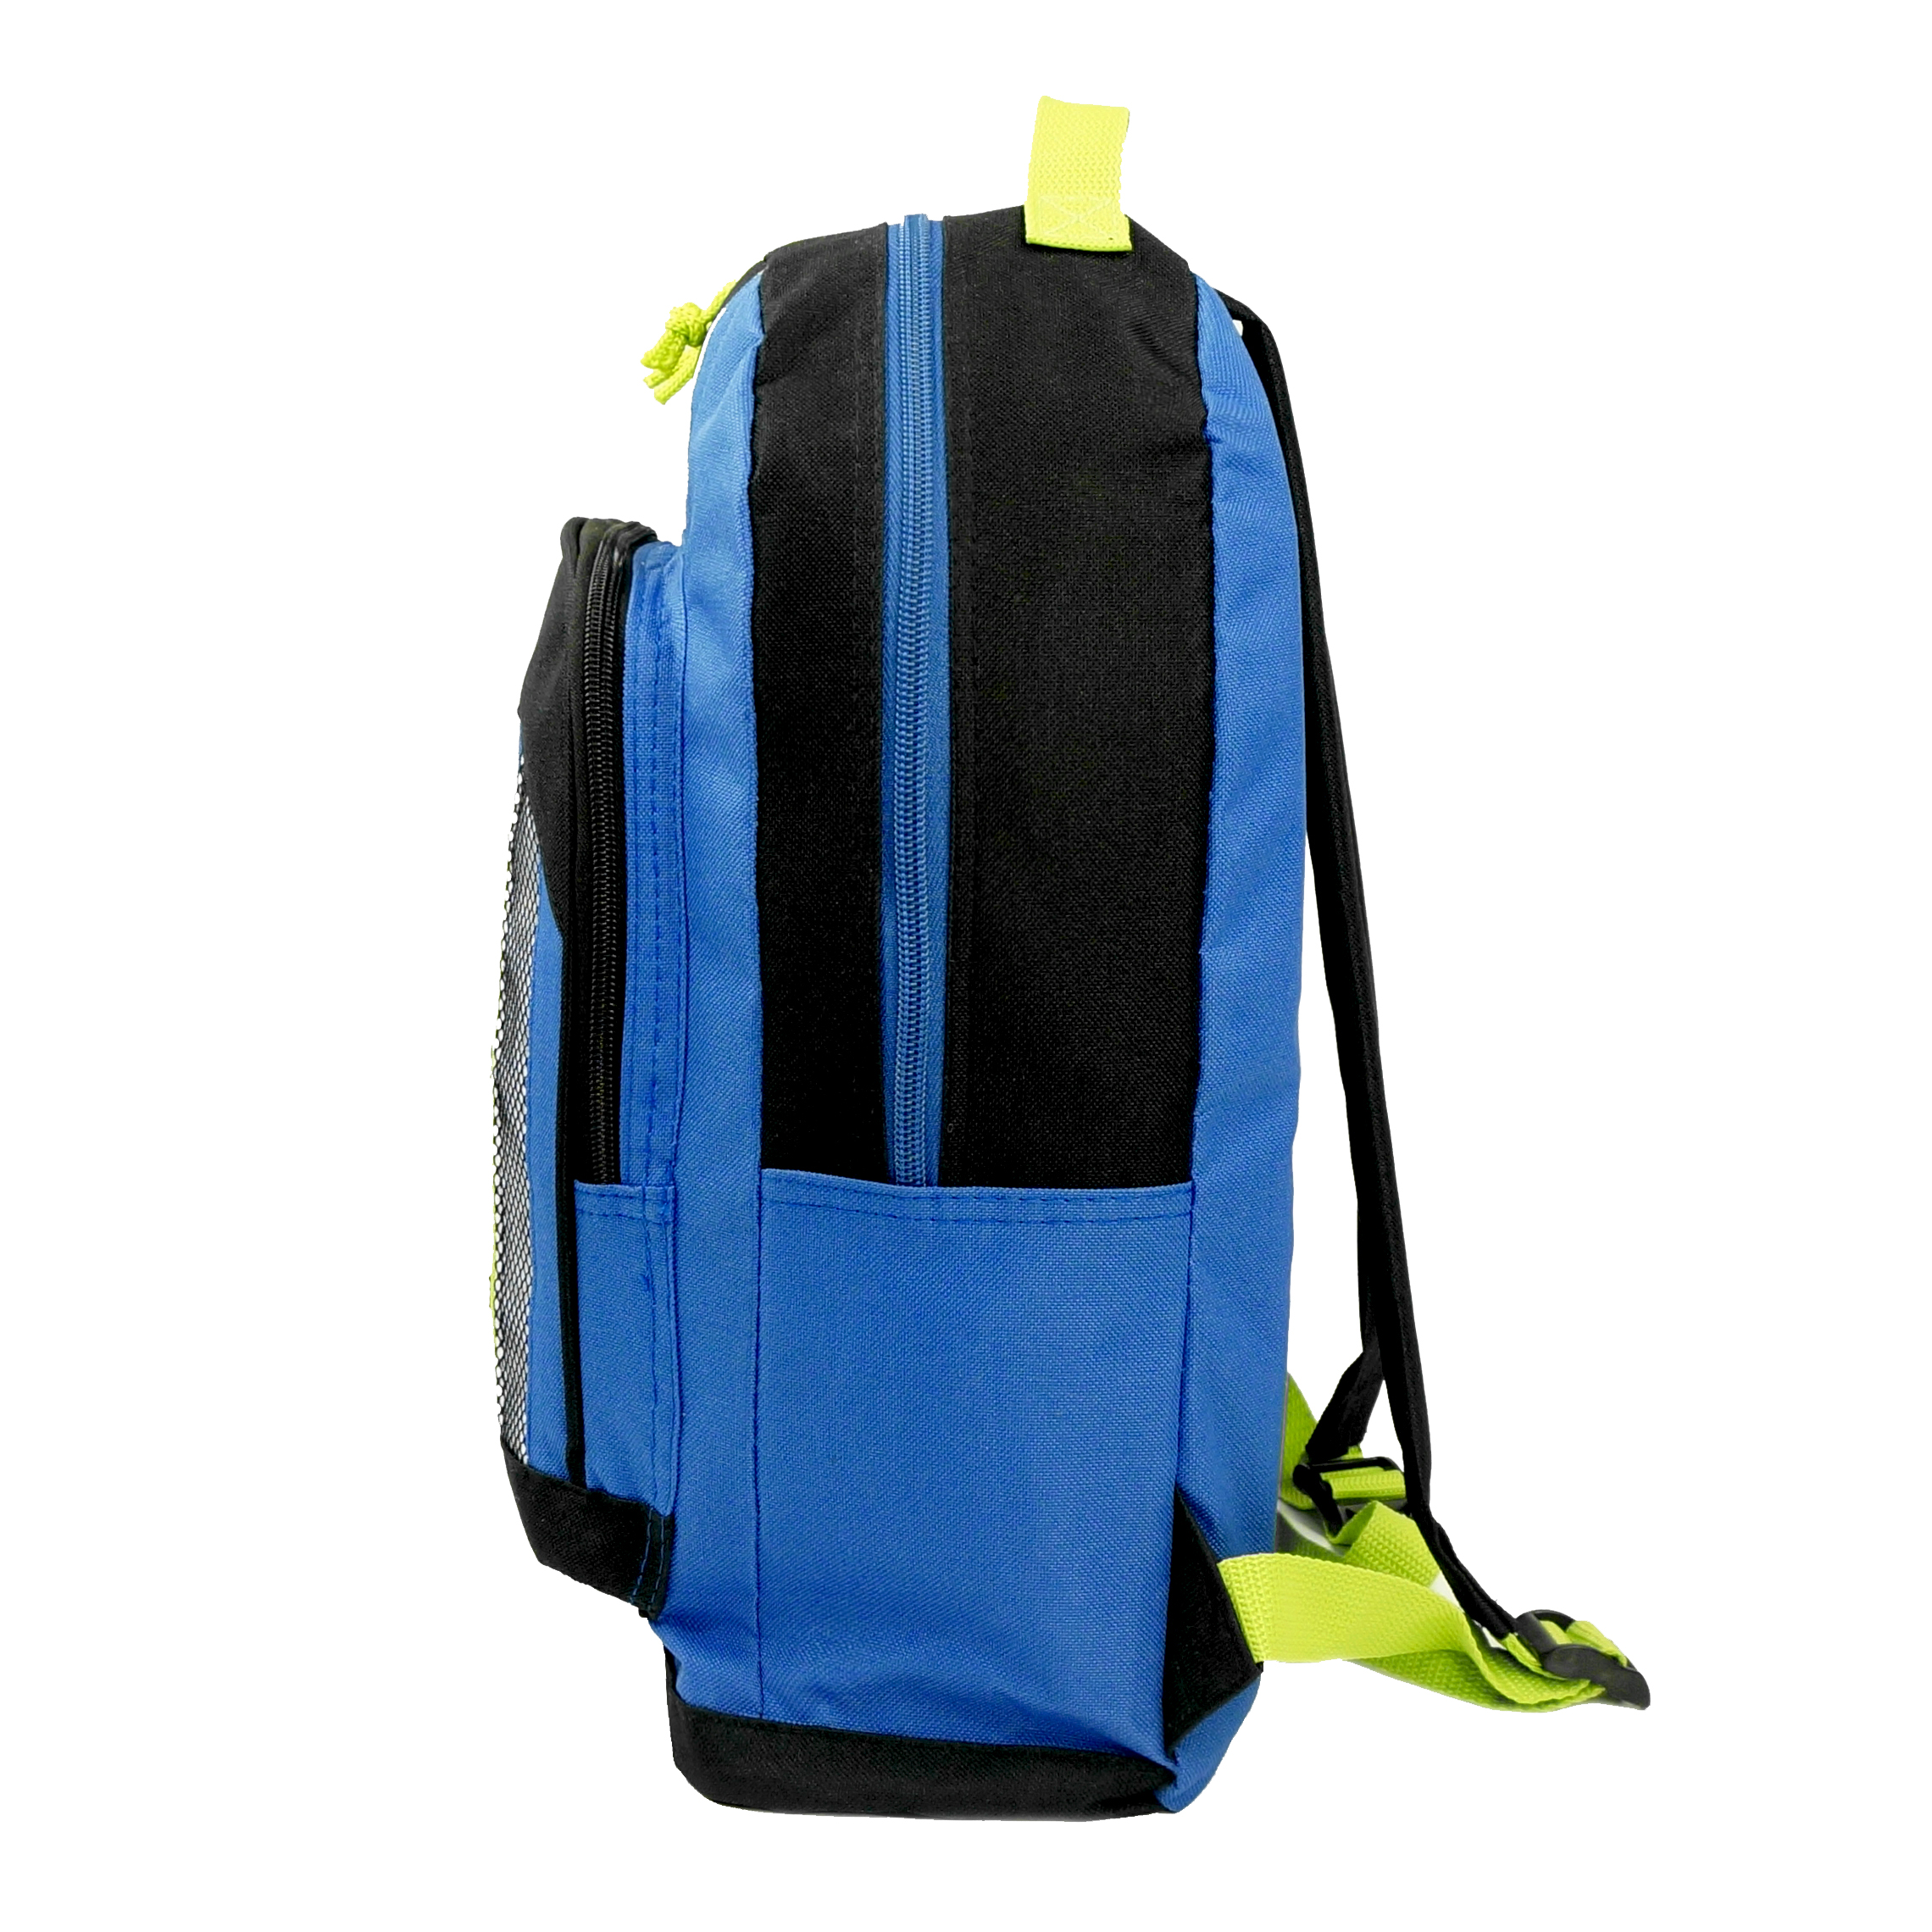 K-Cliffs 15" Lightweight Backpack, Daypack Bungee Water Resistant for Travel School and College, Unisex Color for Casual Everyday Kids & Teens (Blue) - image 2 of 6